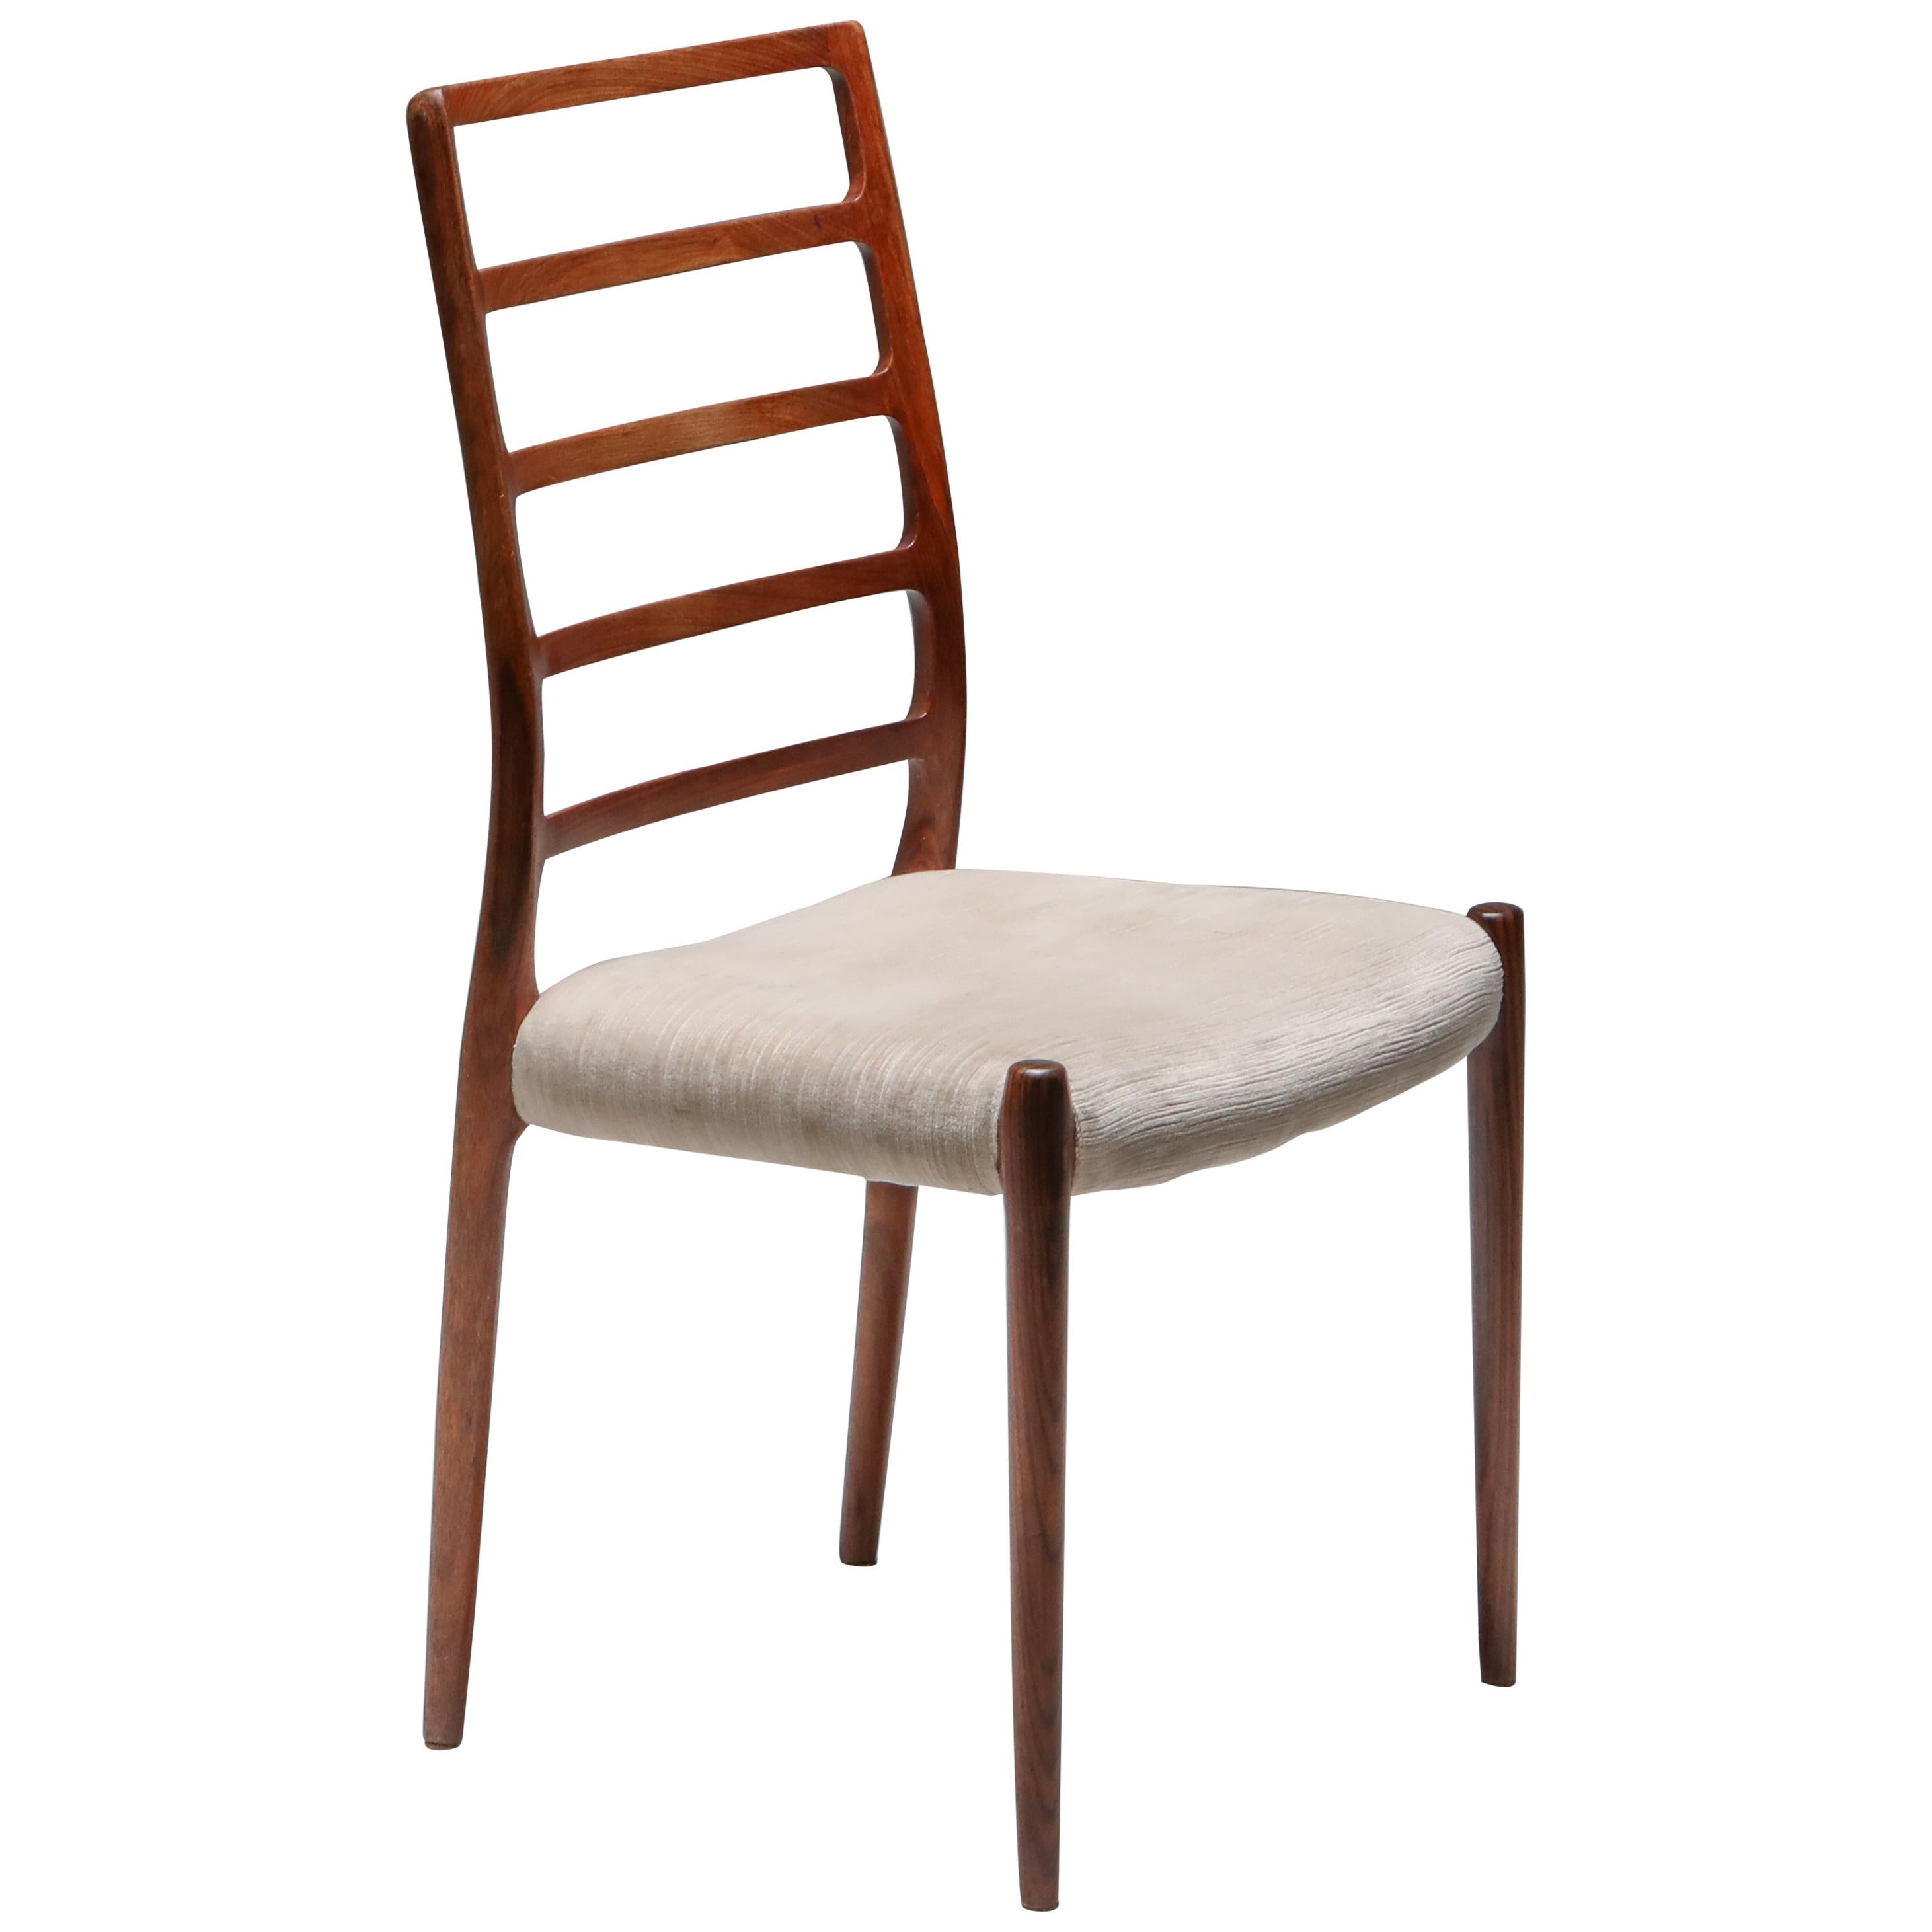 Danish Rosewood Dining Chairs, circa 1970 by Niels Møller